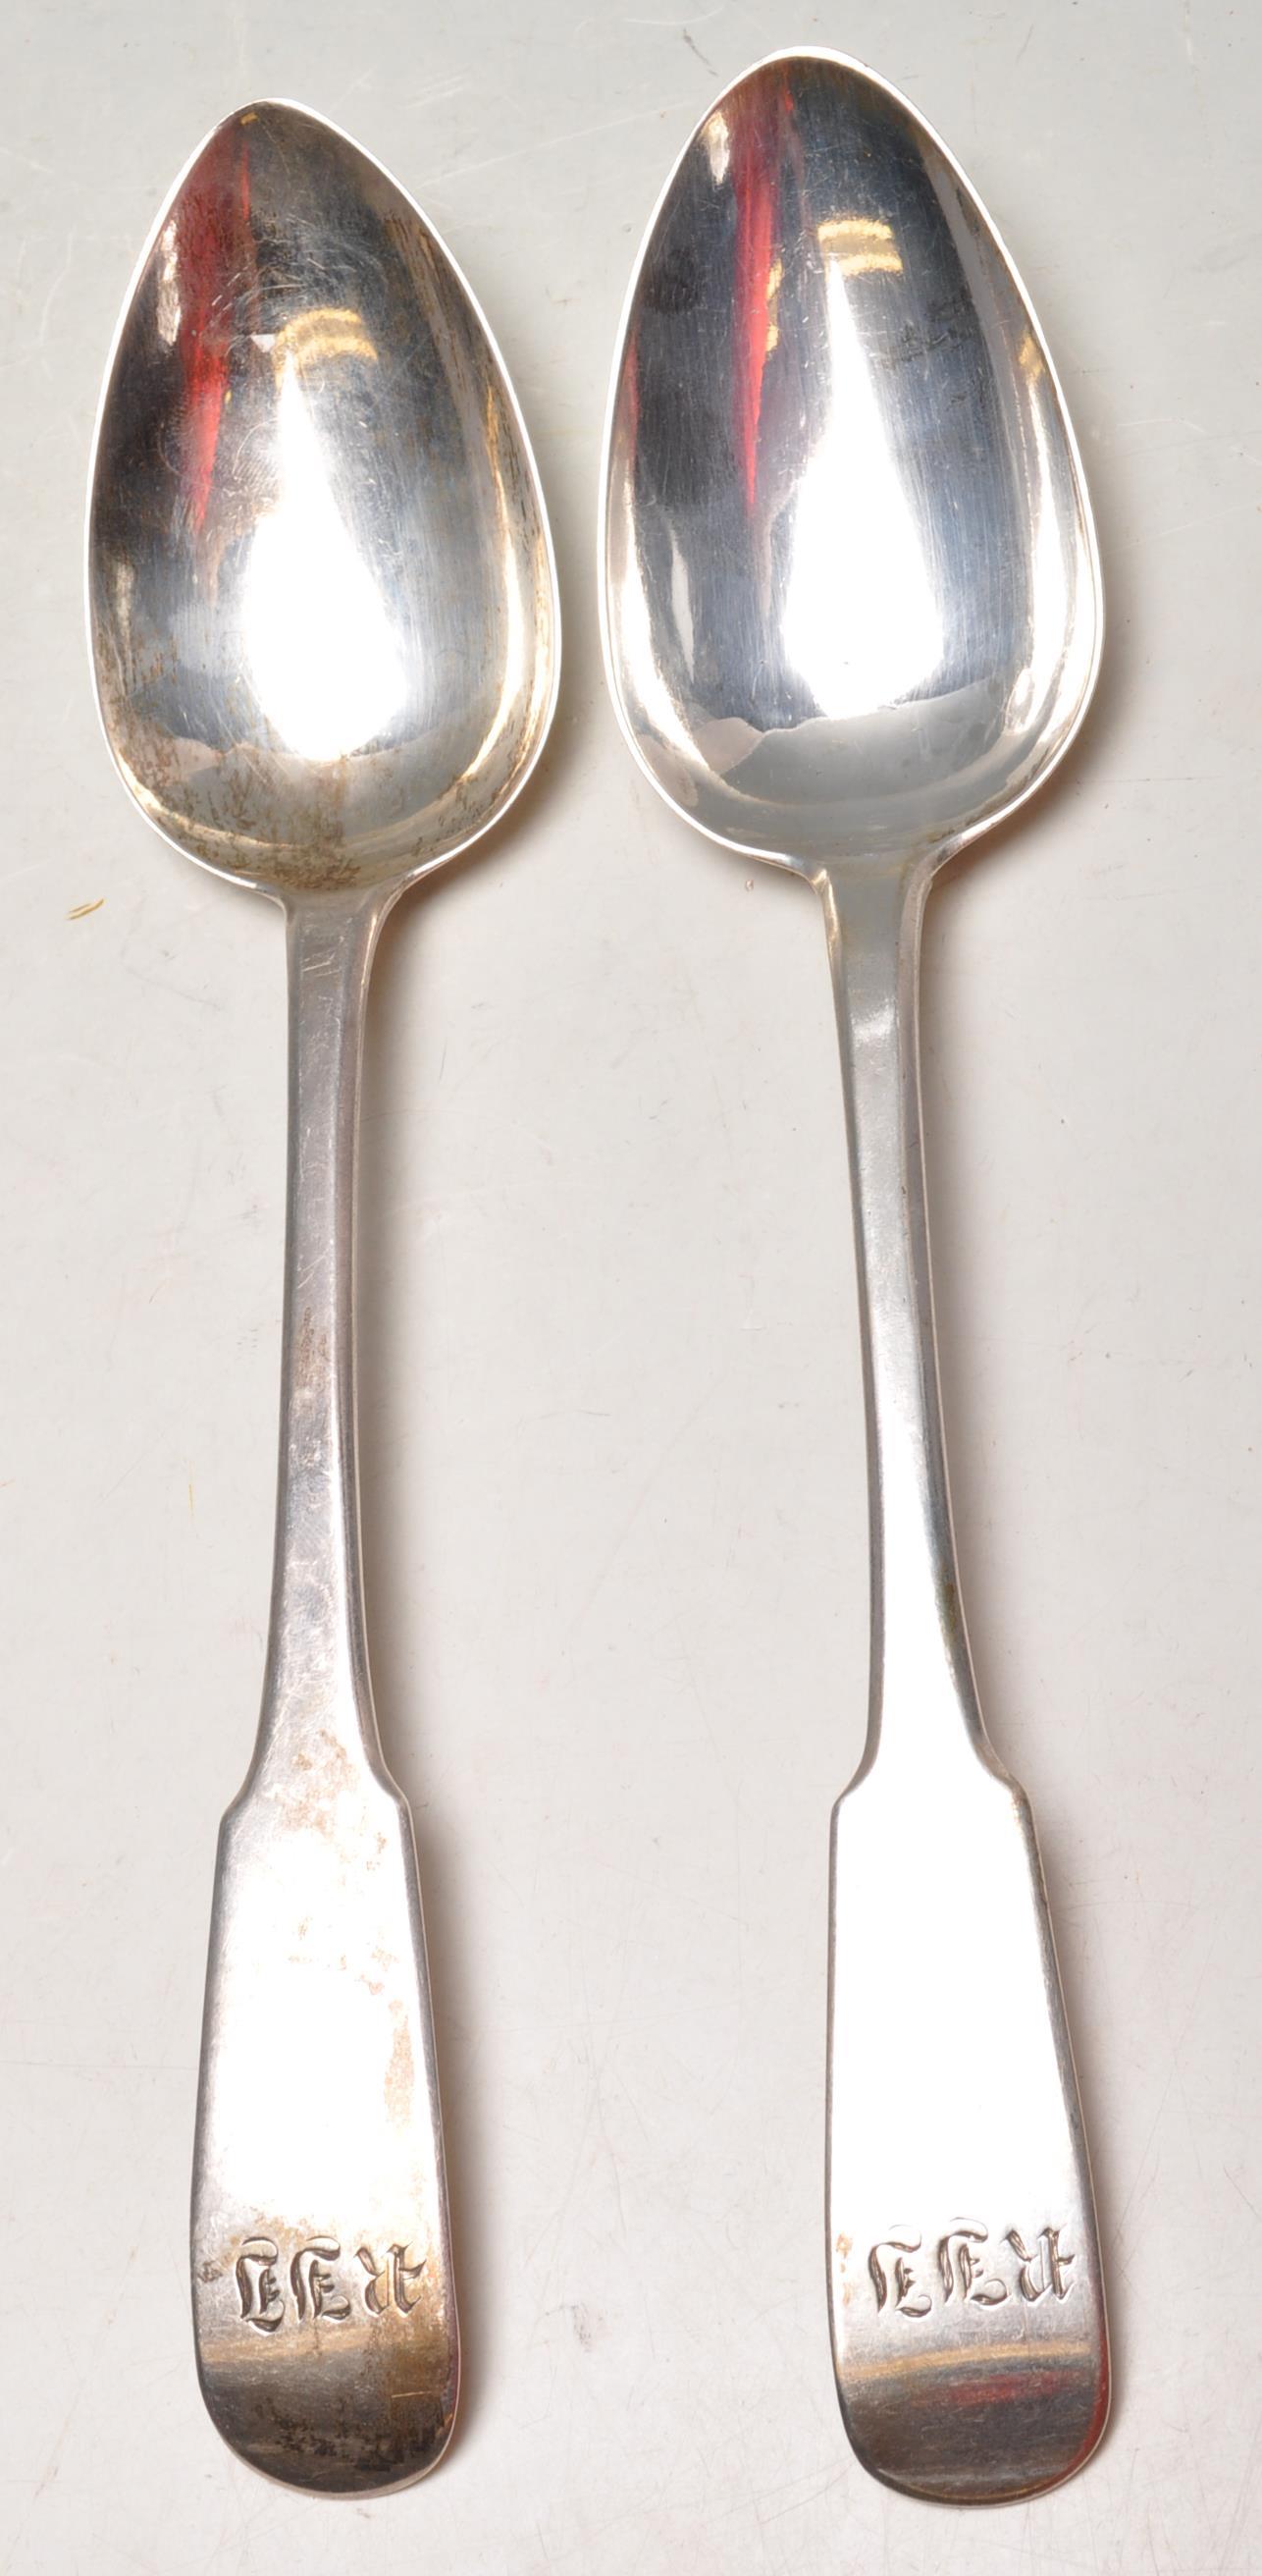 TWO 19TH CENTURY GEORG III SILVER HALLMARKS TABLE SPOON DATED 1819 / 1812